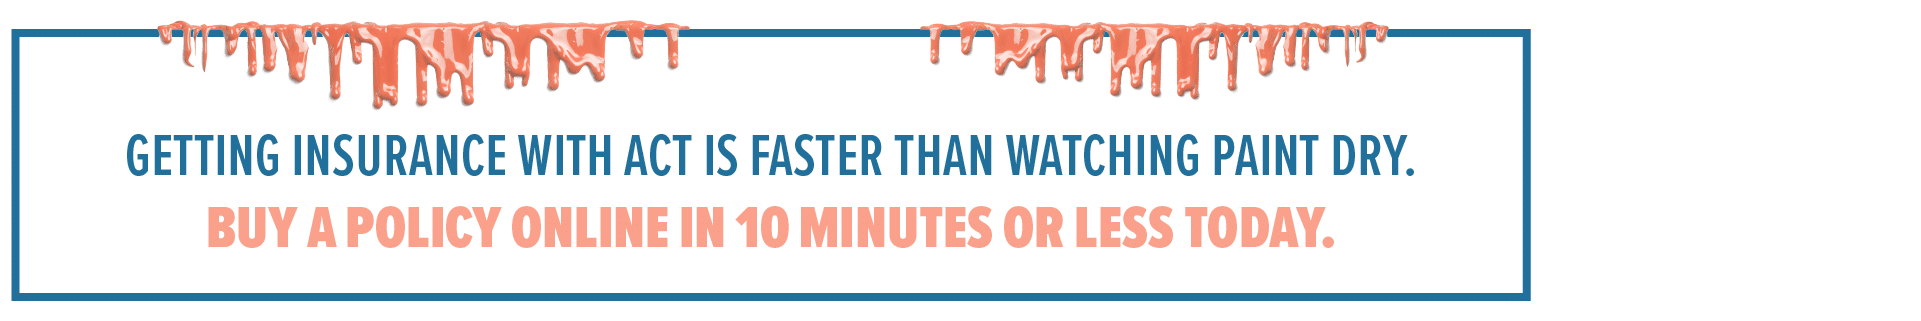 Getting insurance with ACT is faster than watching paint dry. Buy a policy online in 10 minutes or less today.